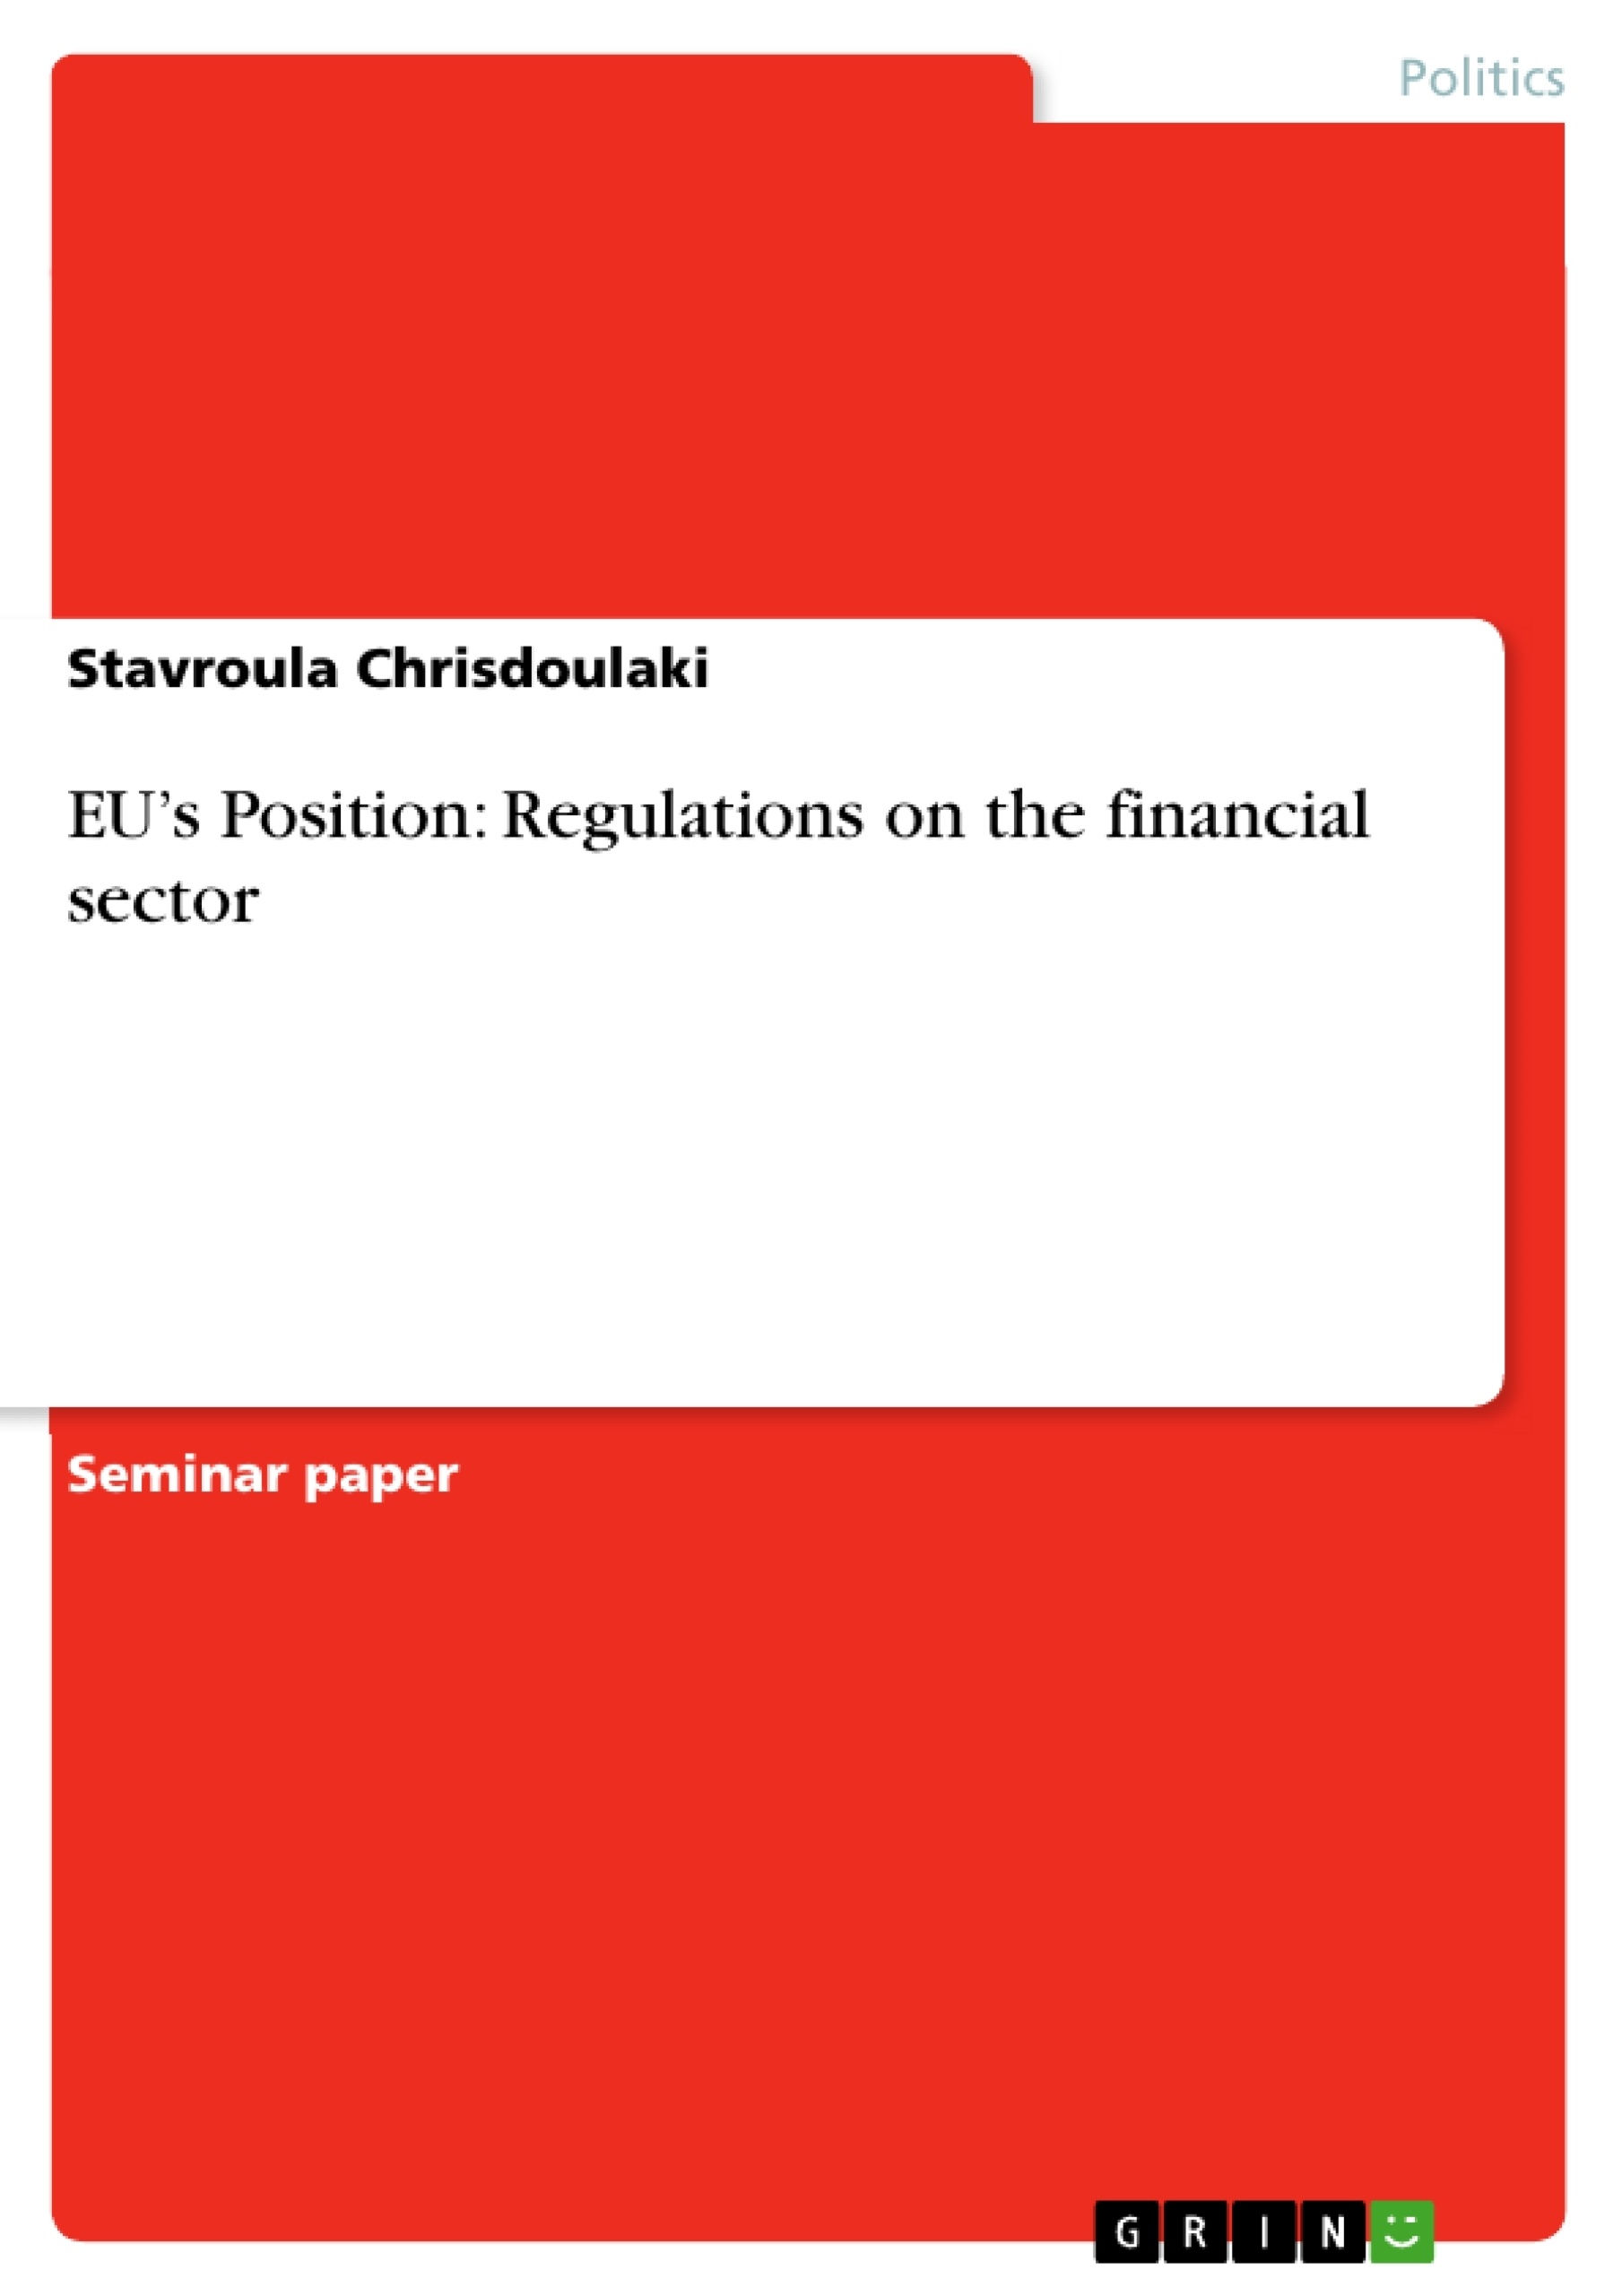 Titel: EU’s Position: Regulations on the financial sector